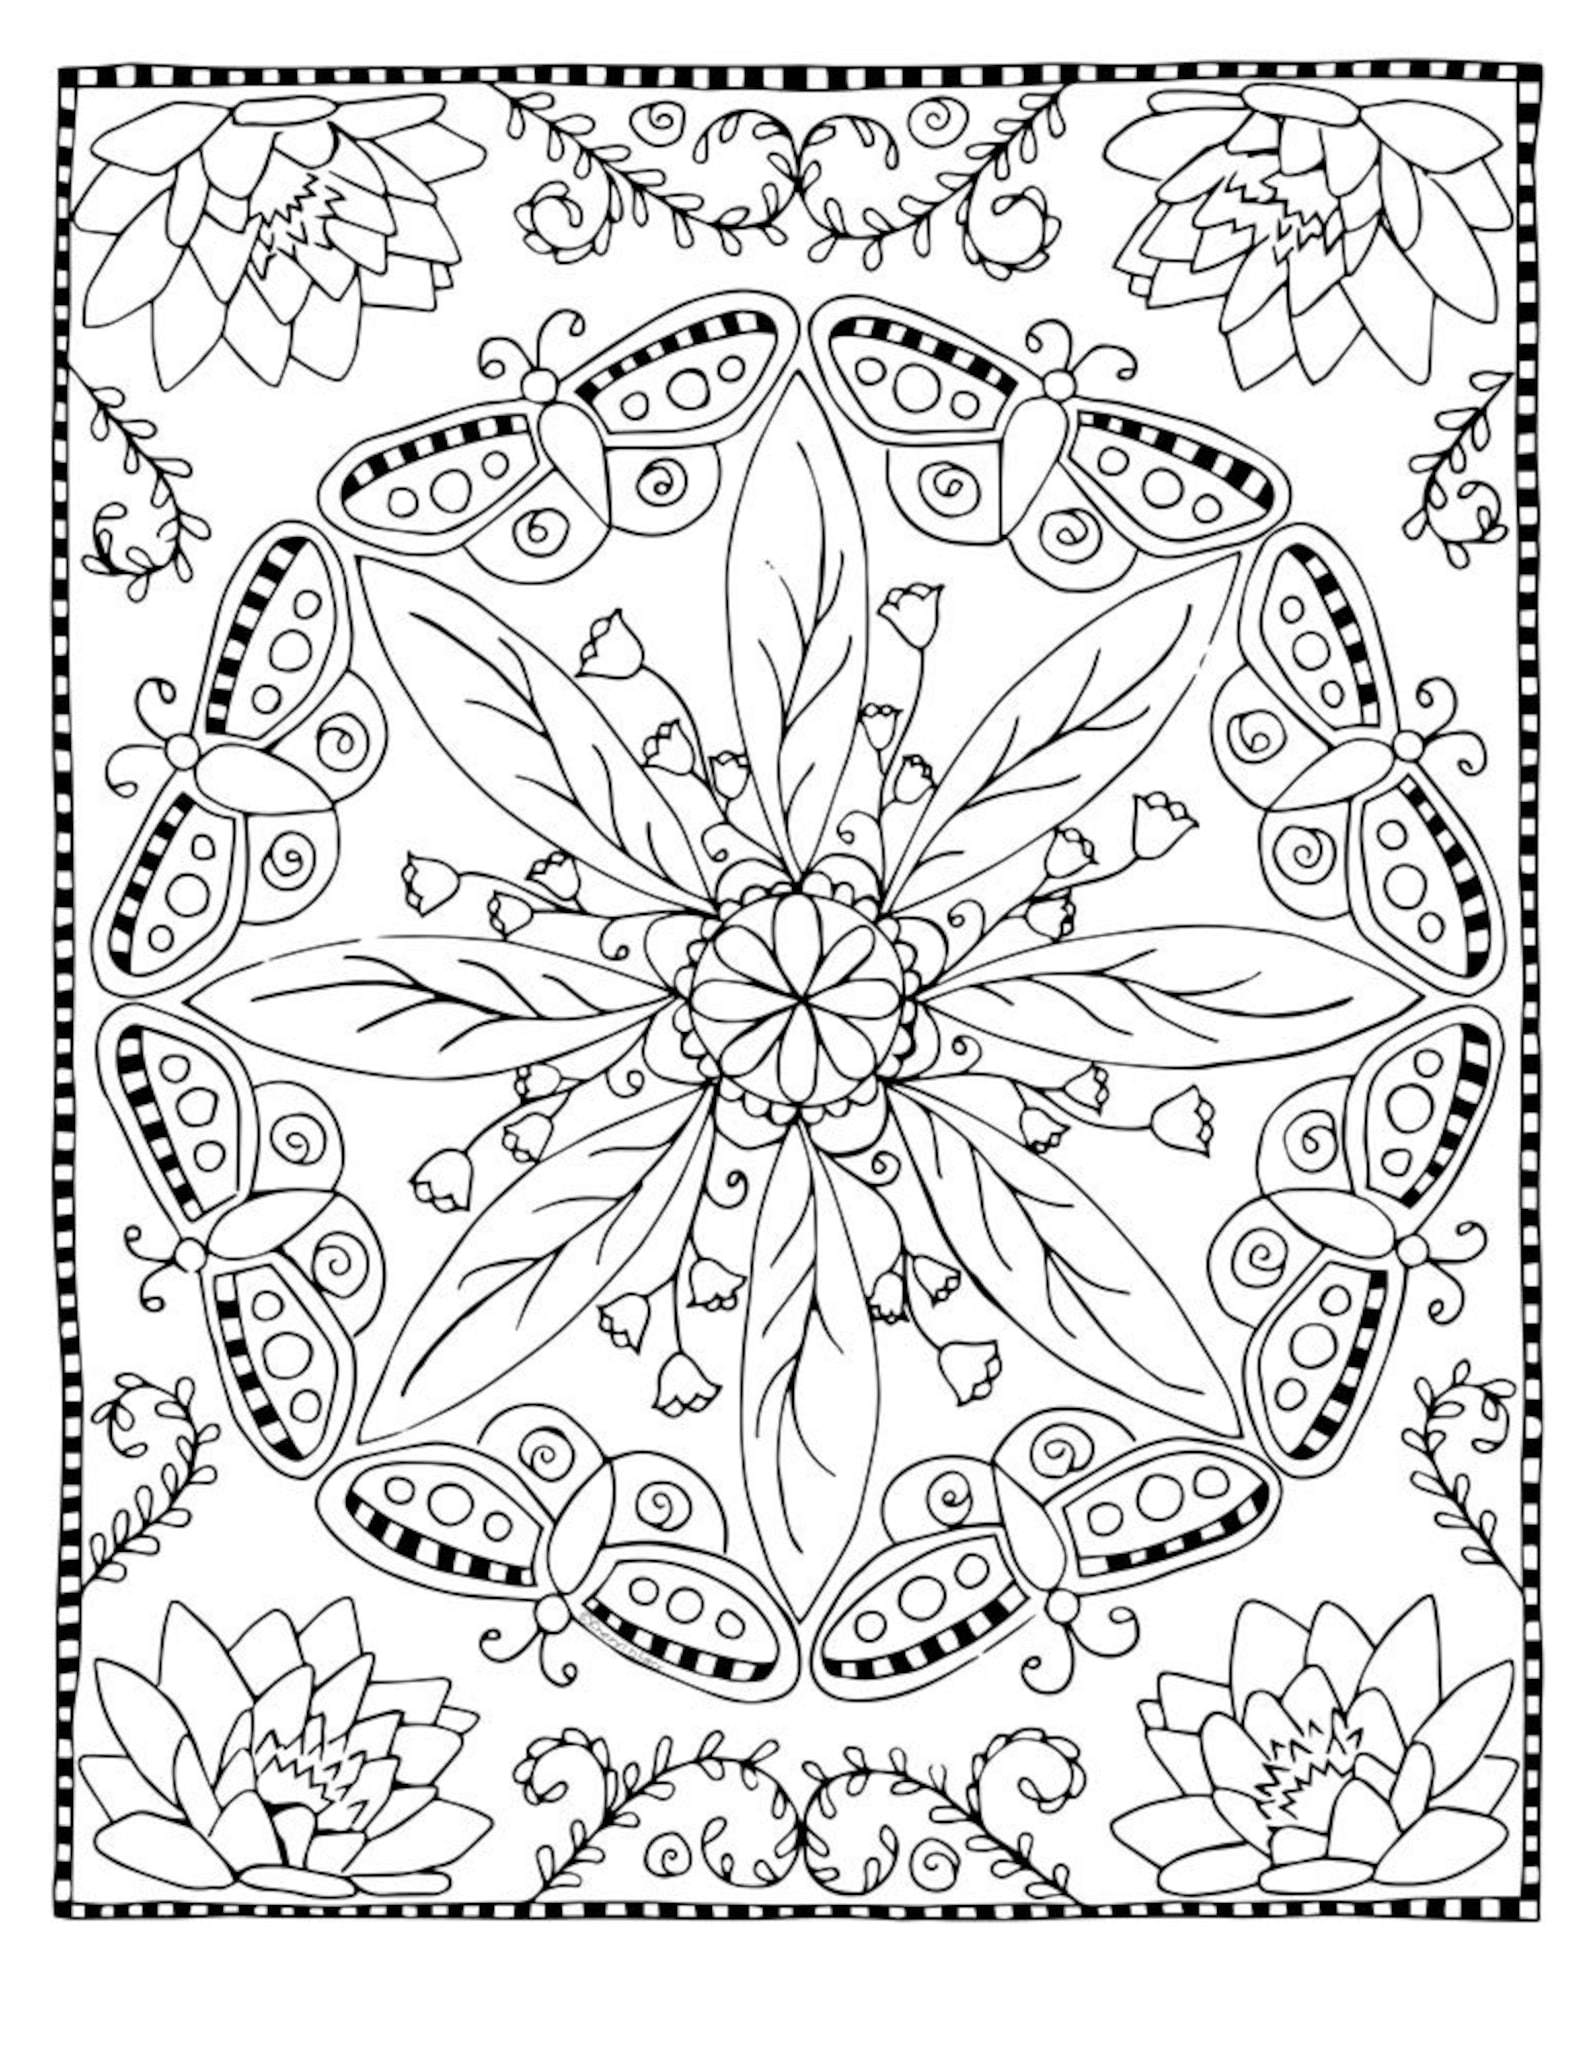 Coloring book shining scarf for children